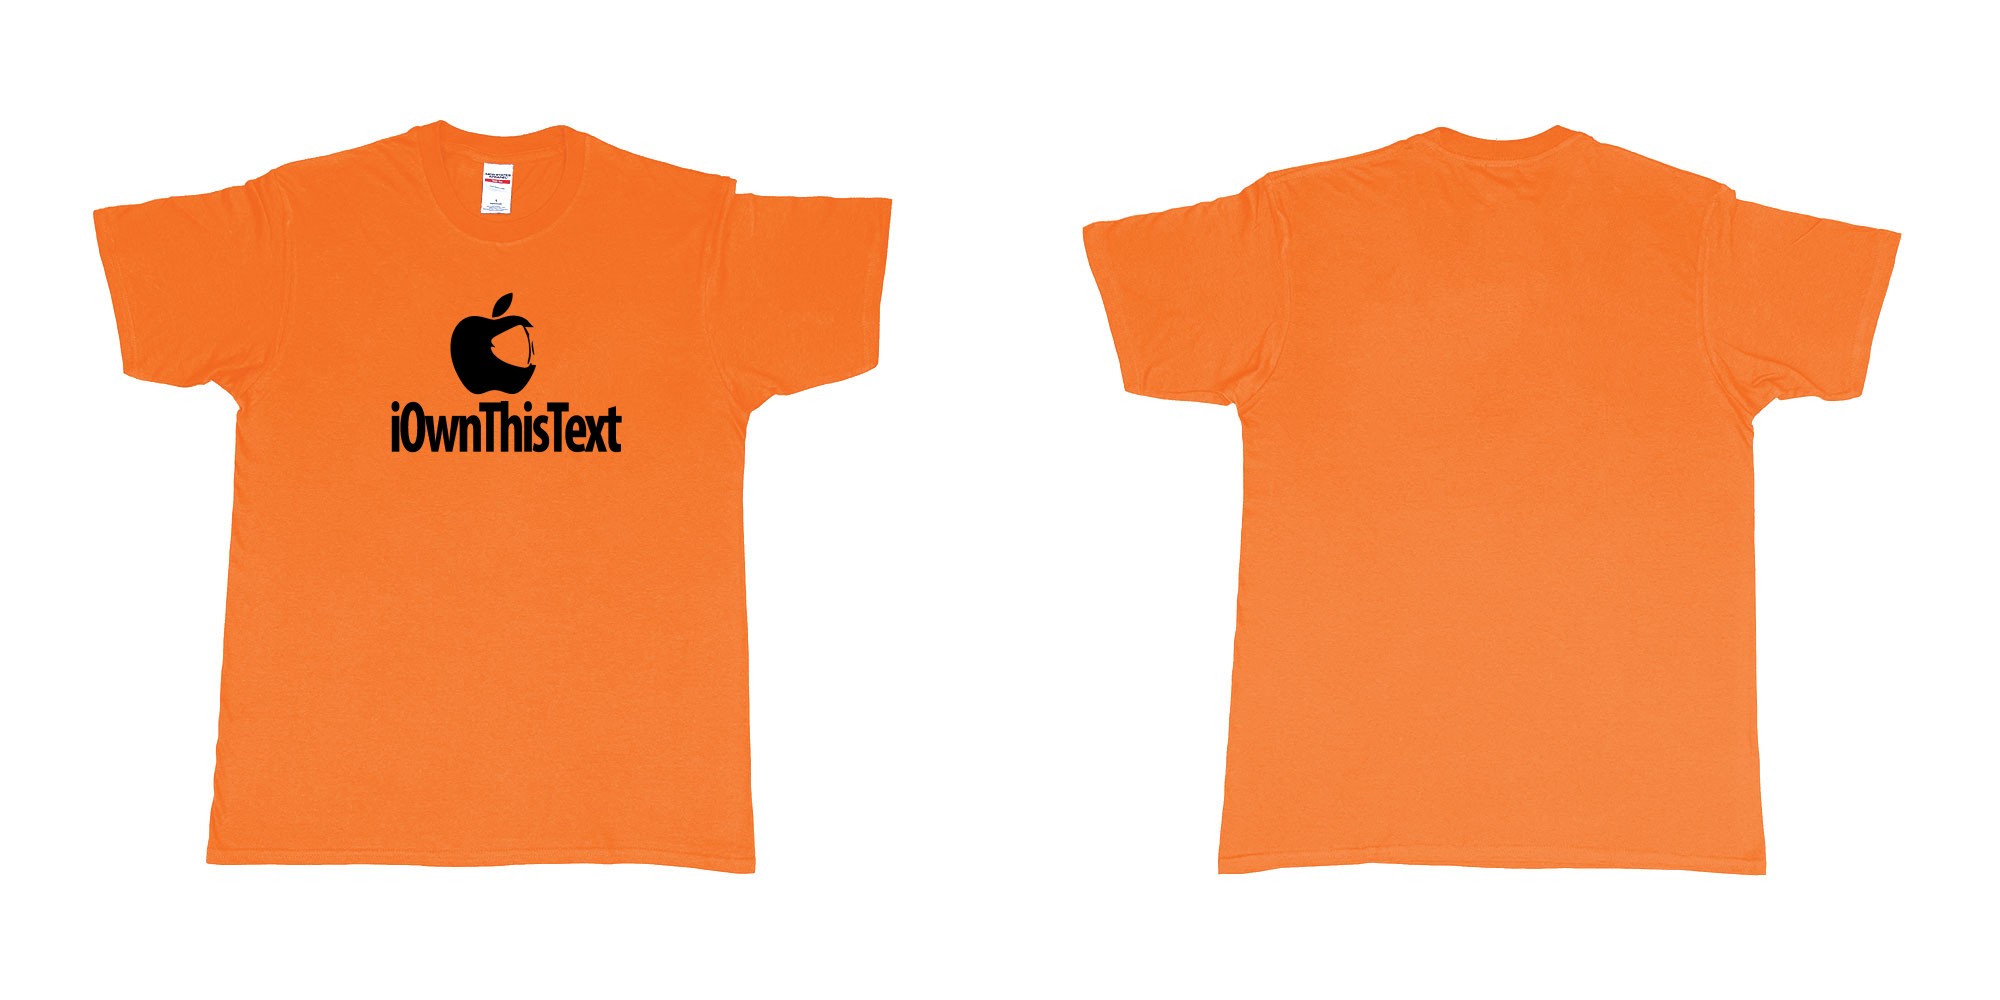 Custom tshirt design Iwanker in fabric color orange choice your own text made in Bali by The Pirate Way